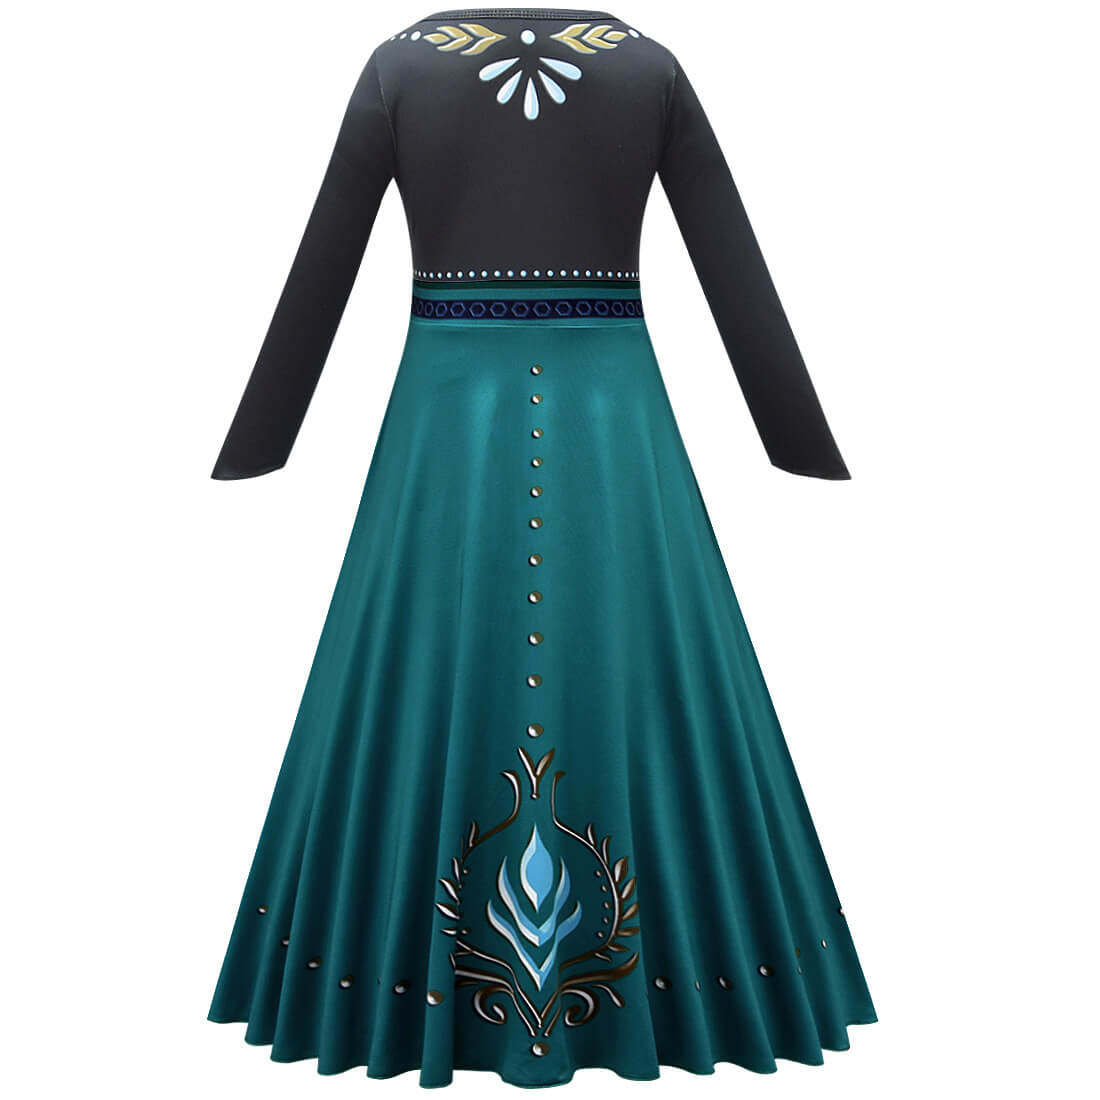 Queen Anna Costume Kids Princess Anna Cosplay Dress with Cloak Role Play Outfit